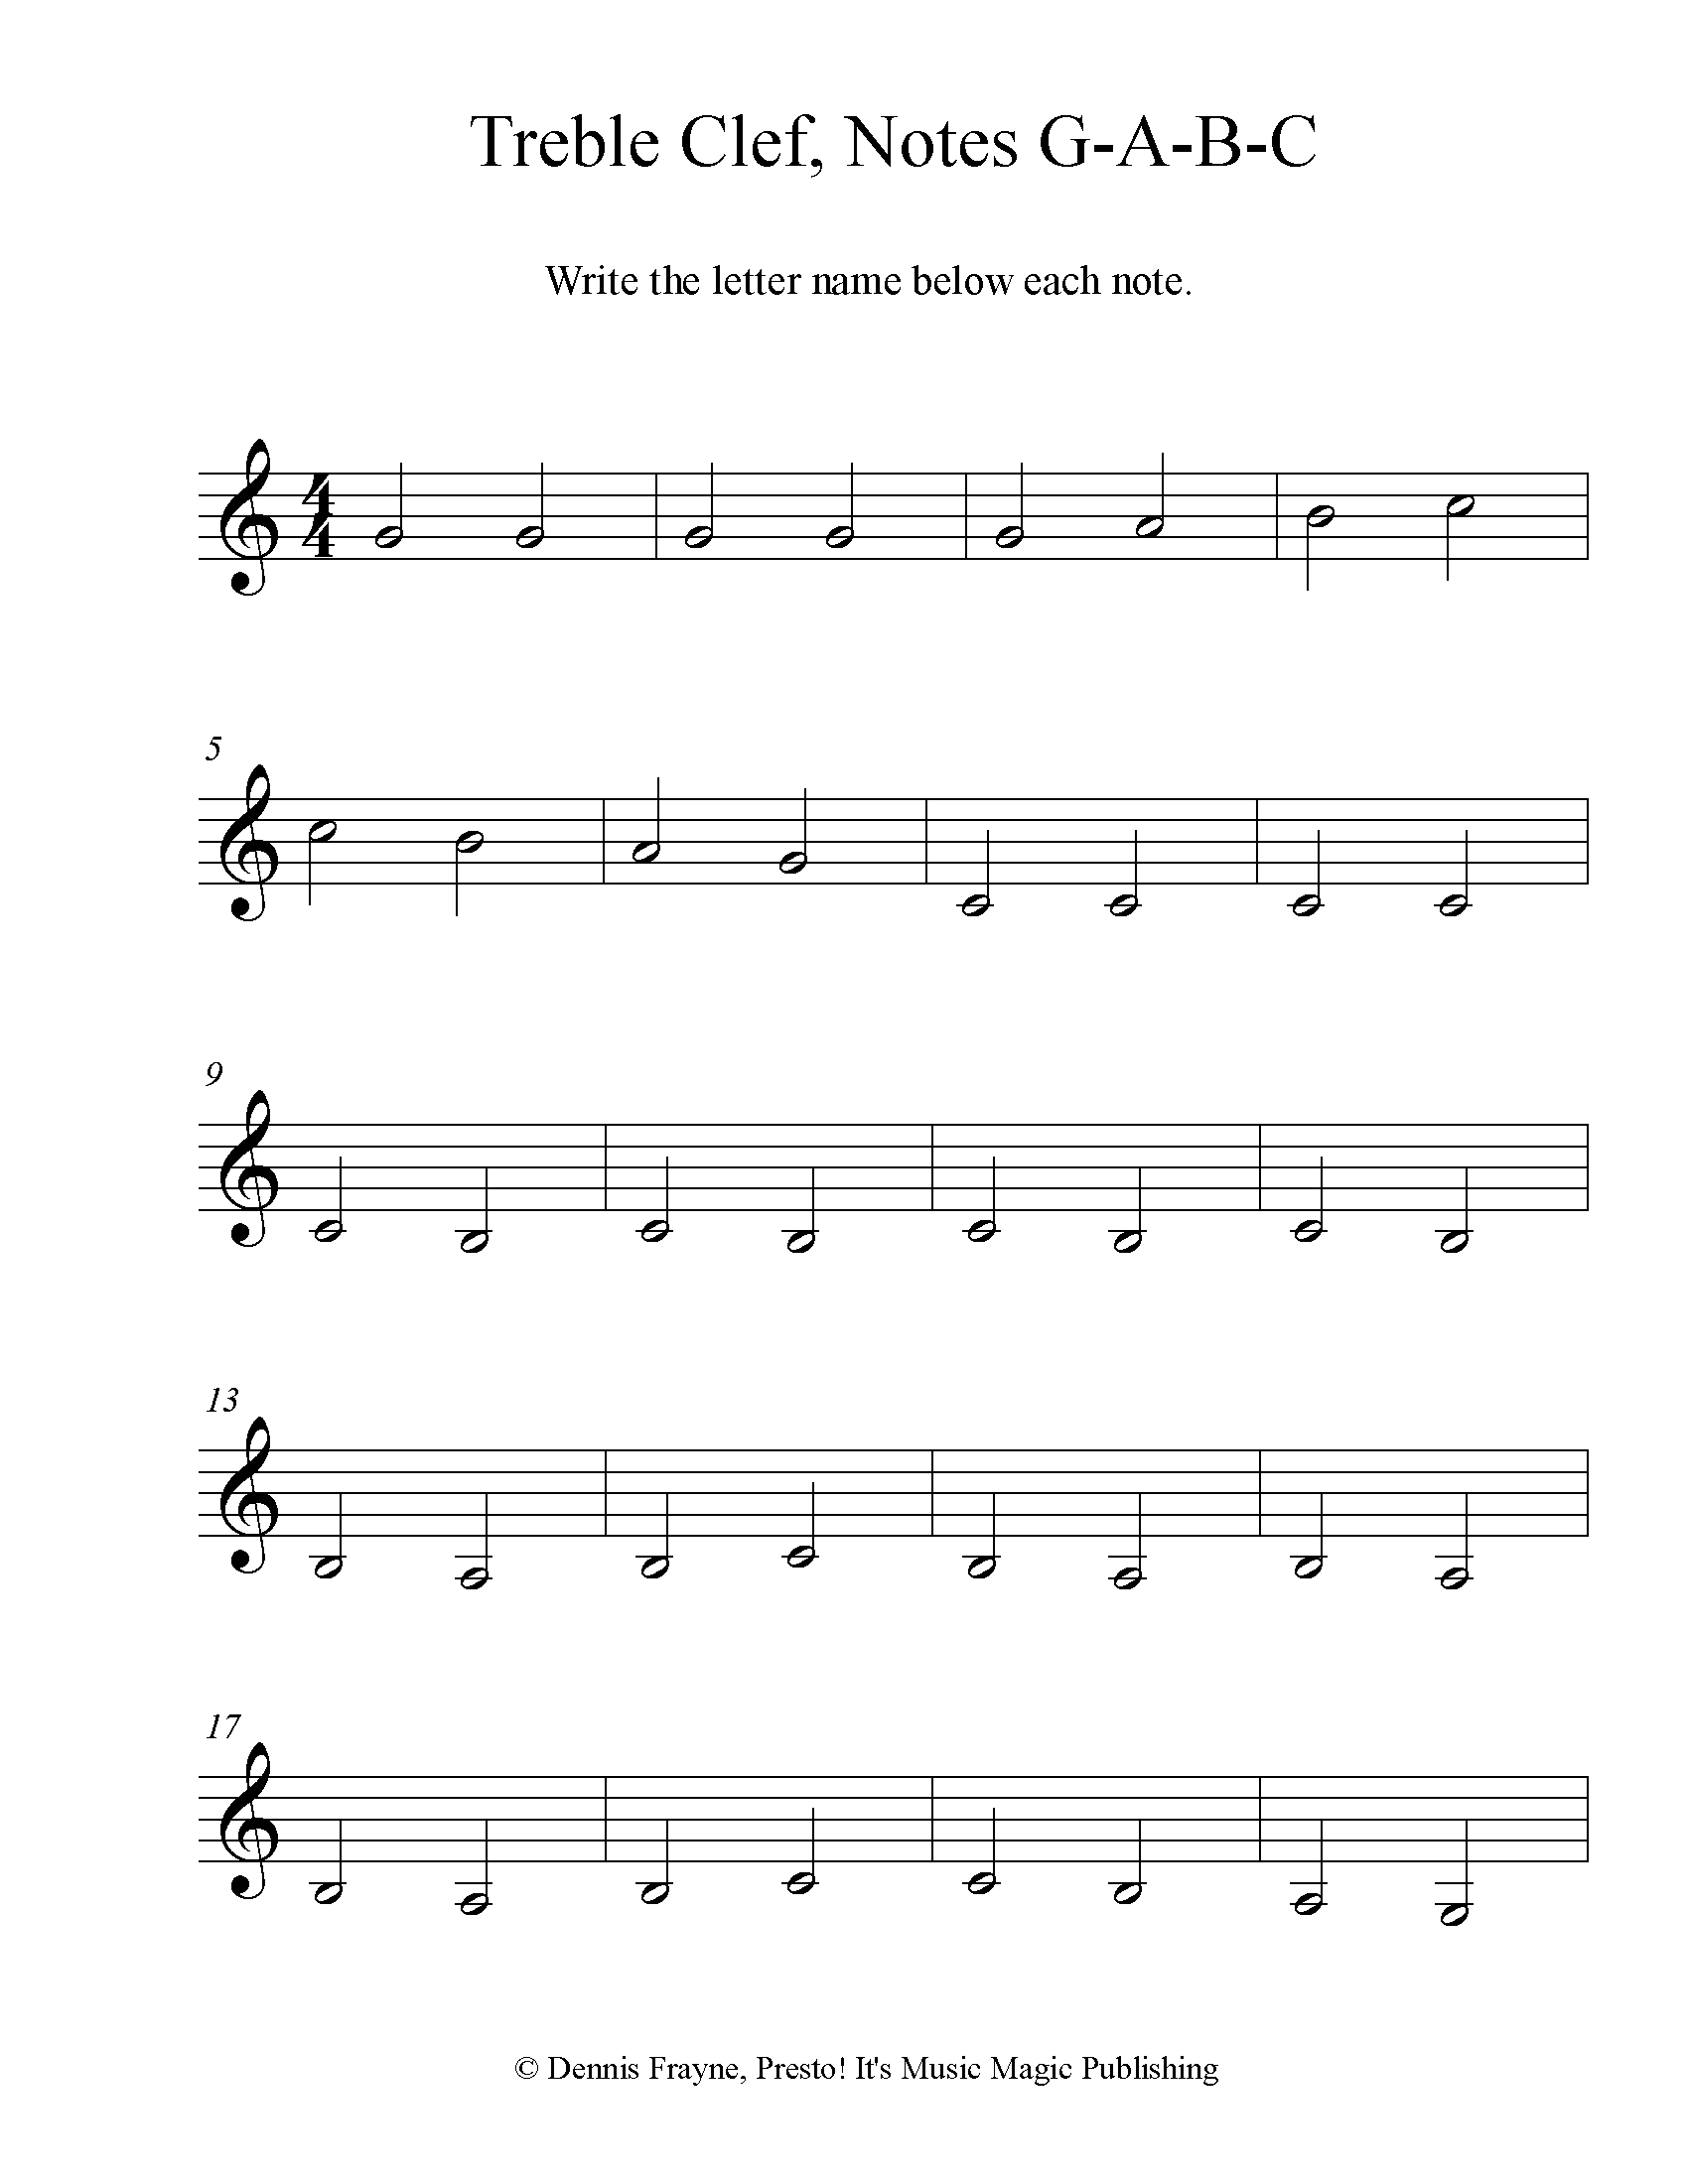 Free! Printable Music Note Naming Worksheets — Presto! It&amp;#039;S Music intended for Beginner Piano Worksheets Printable Free